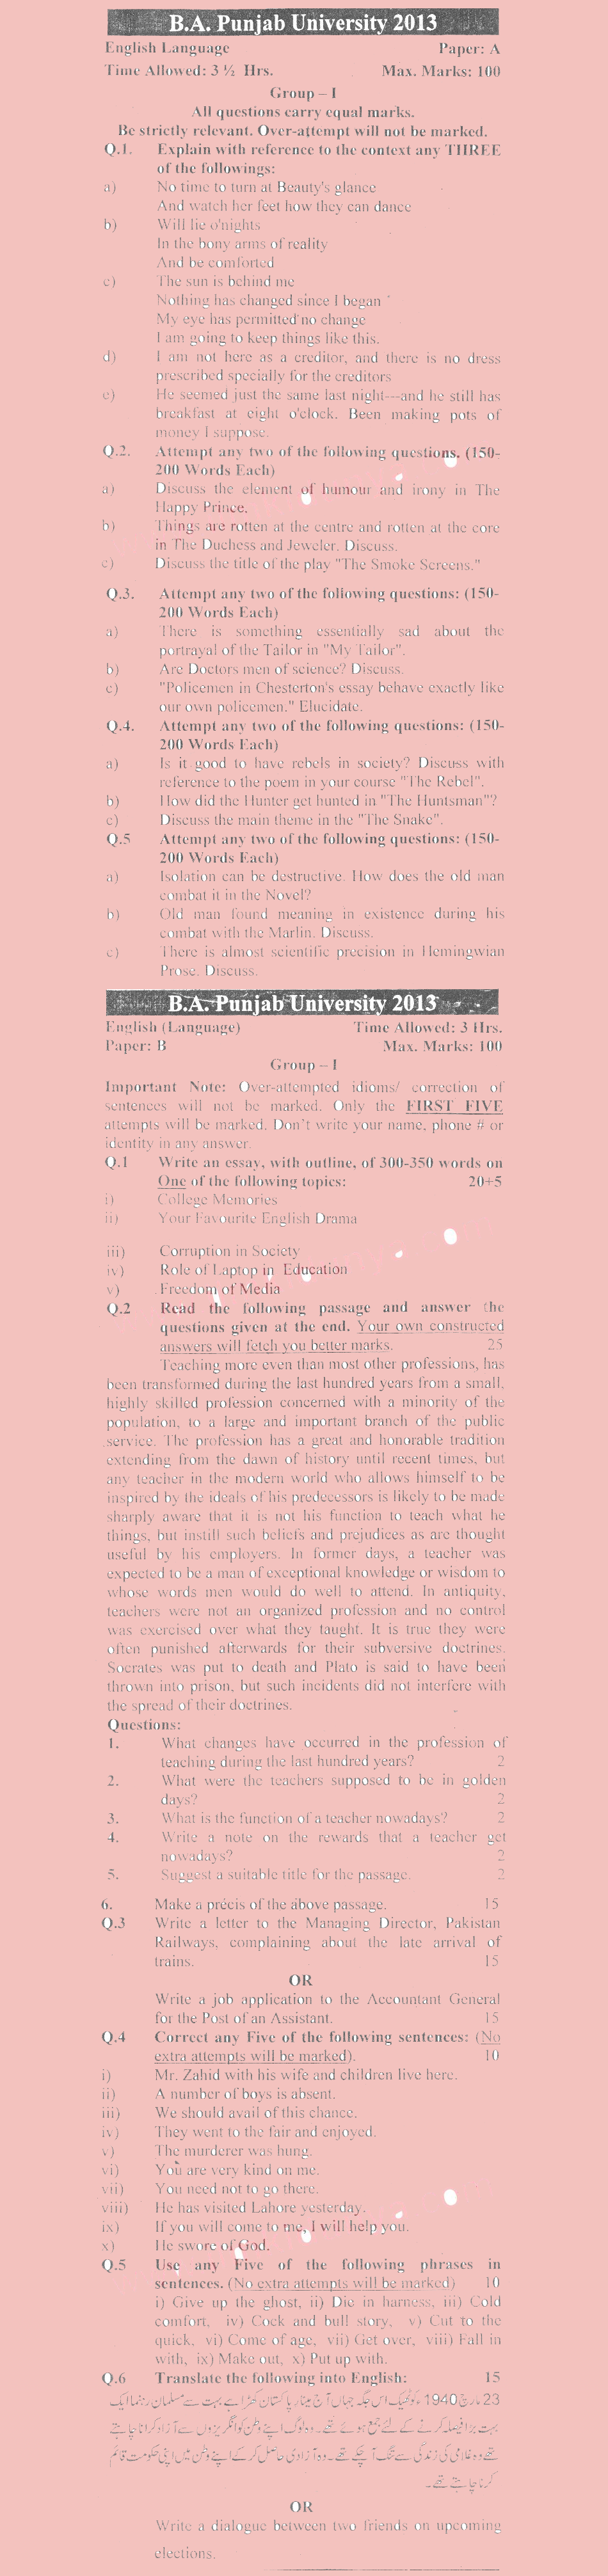 BA-BSc-English-Past-Papers-PU-2013-Group-I